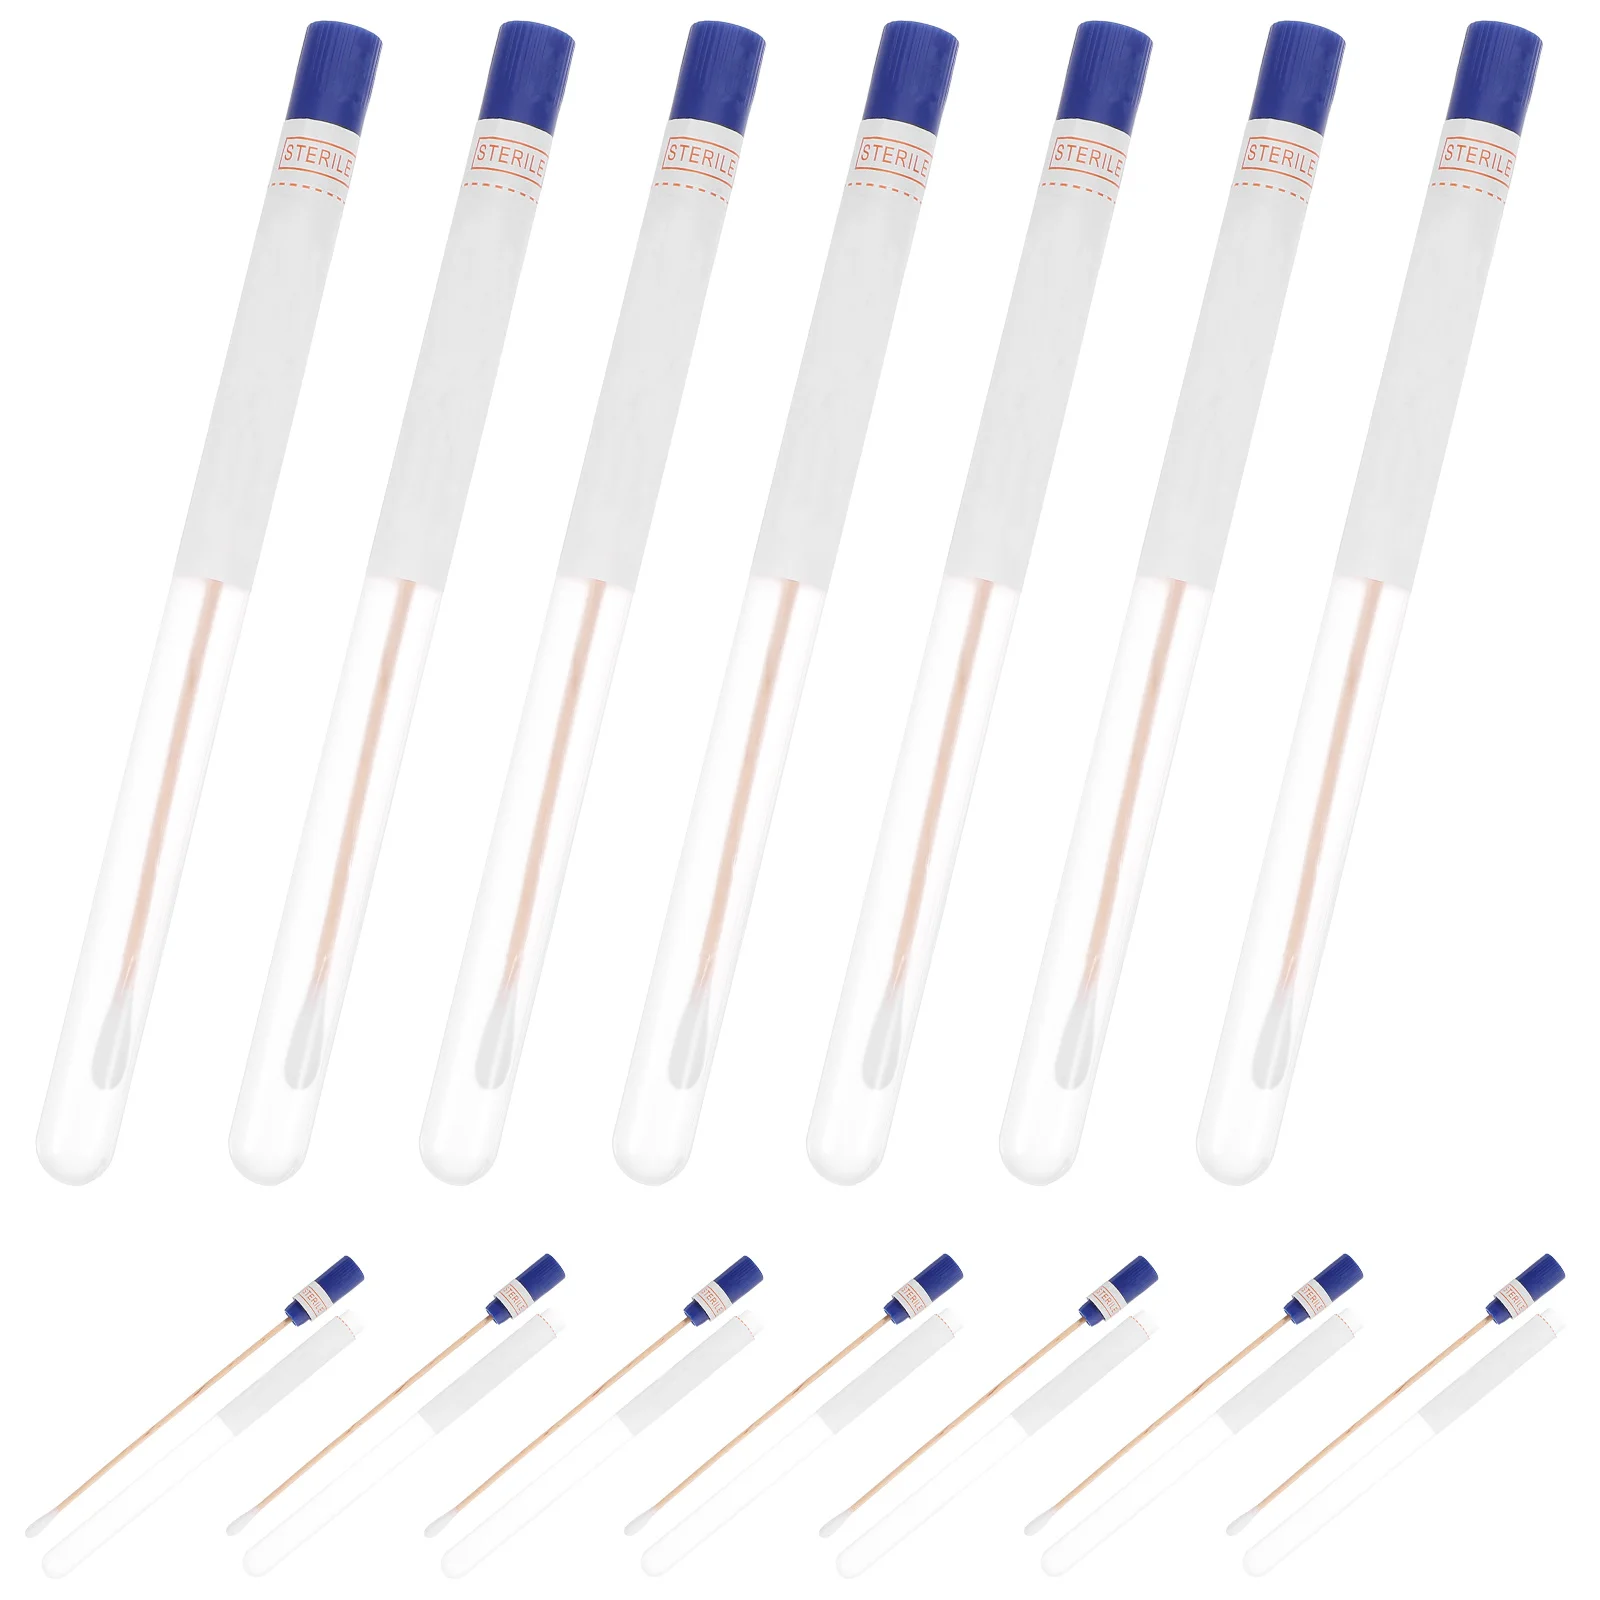 

150 Pcs Detection Sampling Cotton Swab Collection Swabs Women Stick Tip Sticks Single Use Cotton Swabs Collecting Male